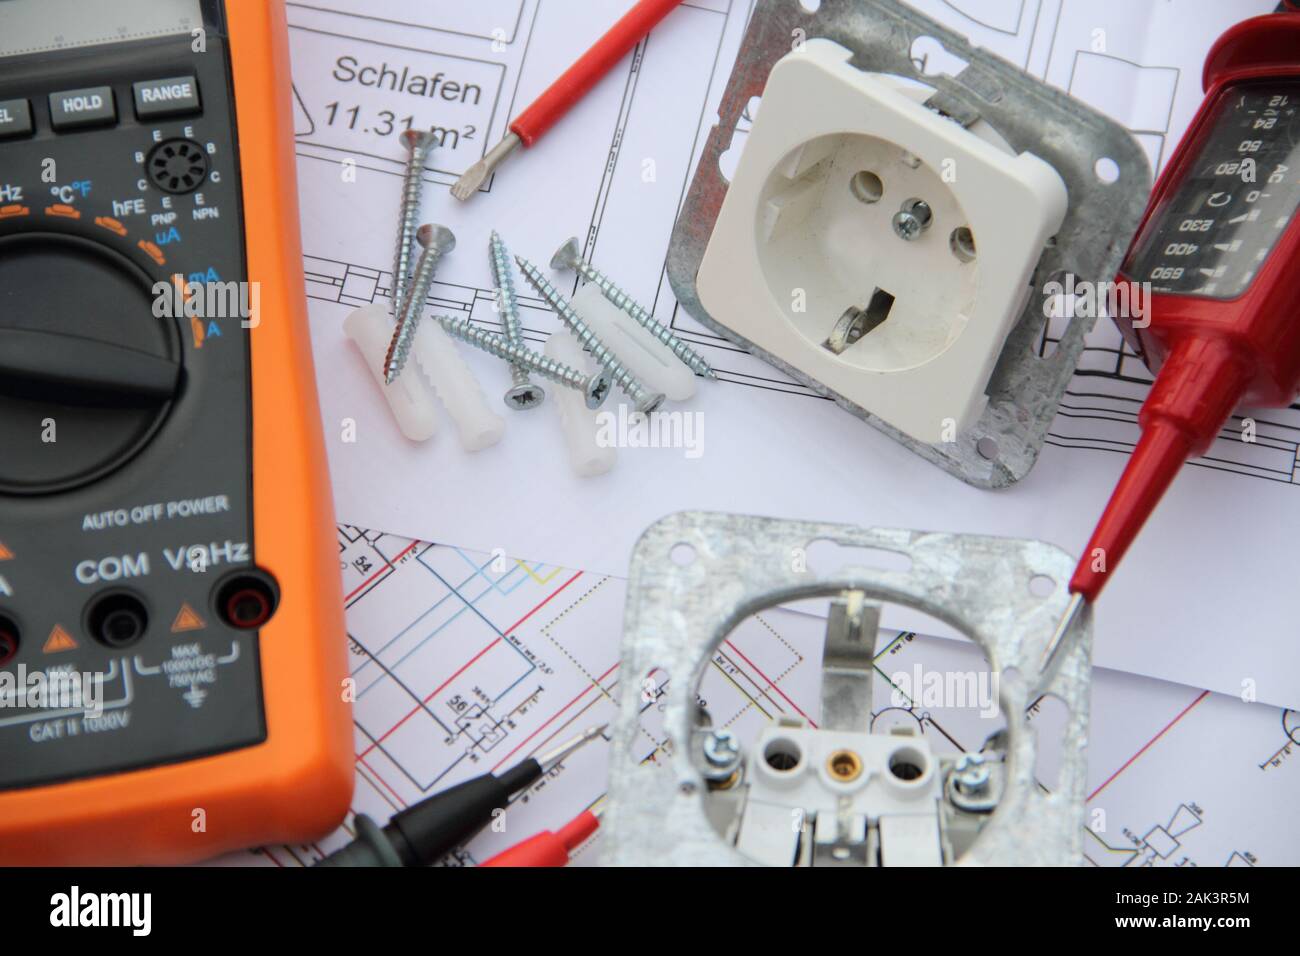 Sockets with a screwdriver and a measuring device on a circuit diagram Stock Photo